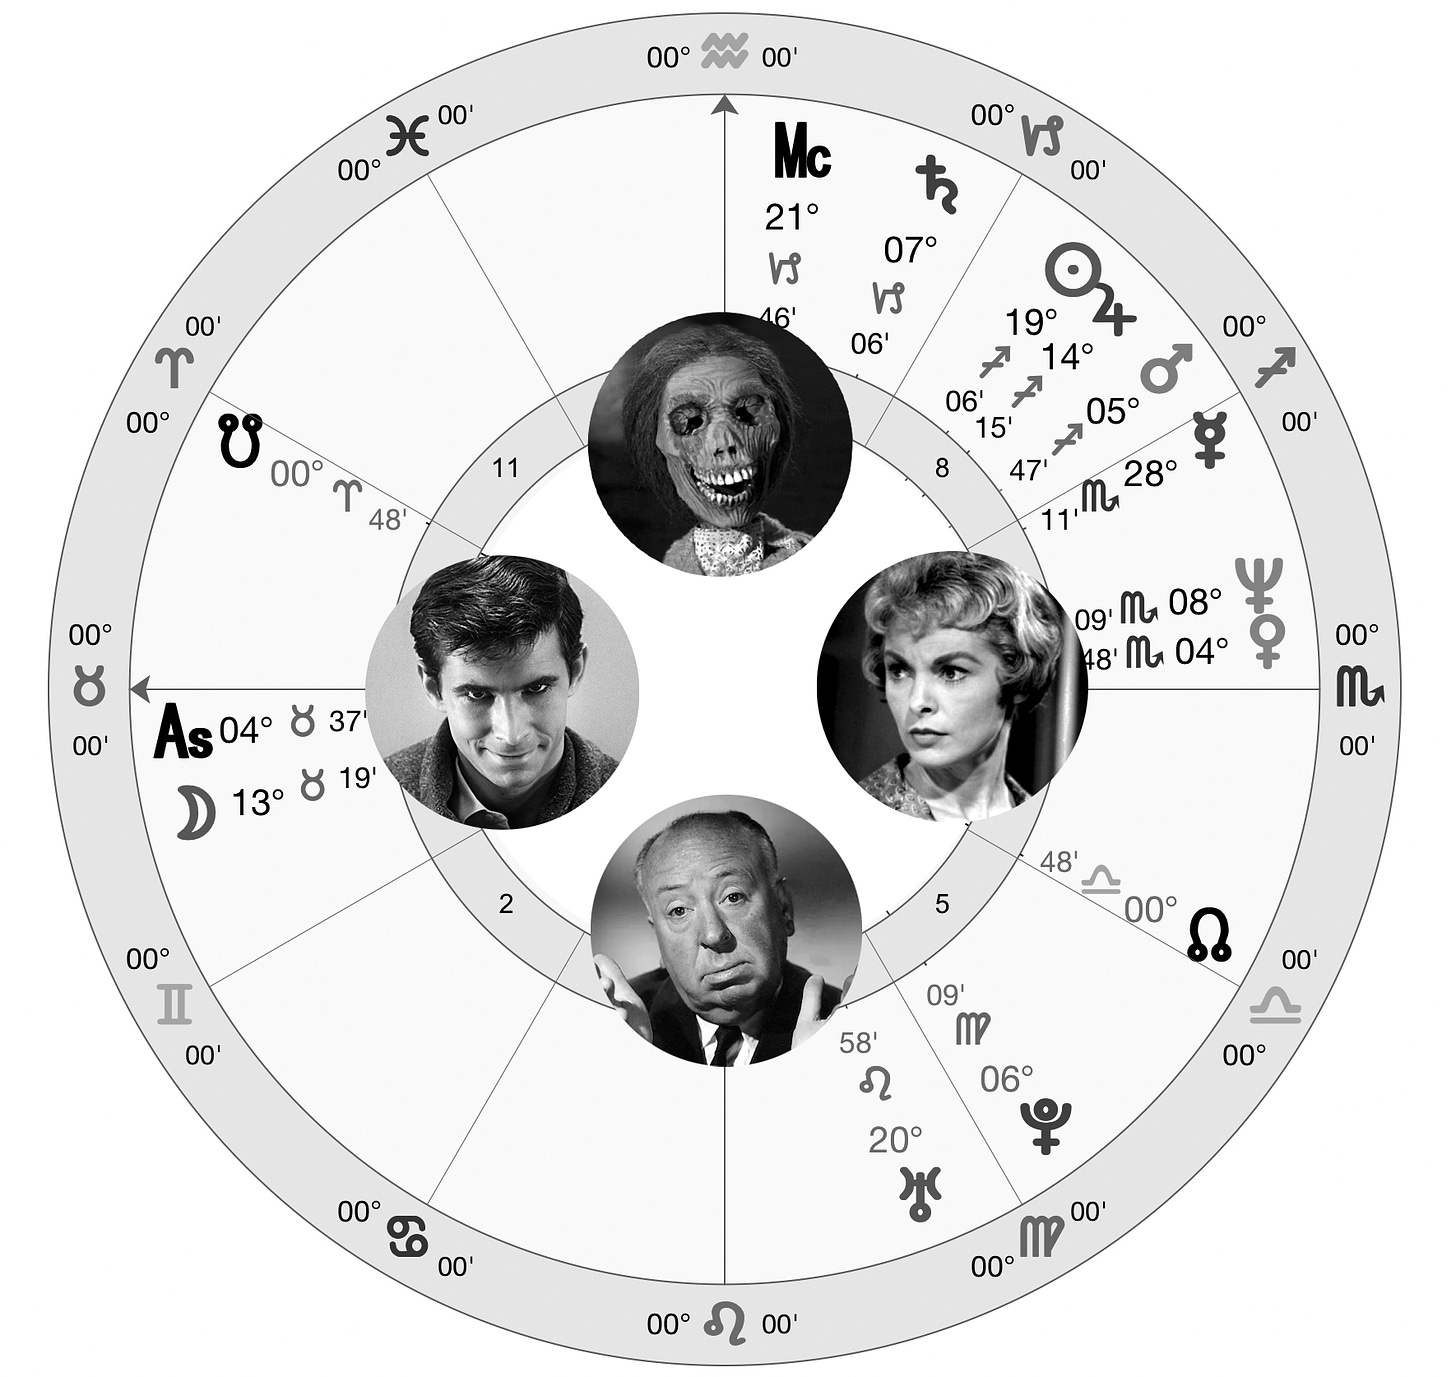 The horoscope for the movie Psycho, astrology and Hitchcock